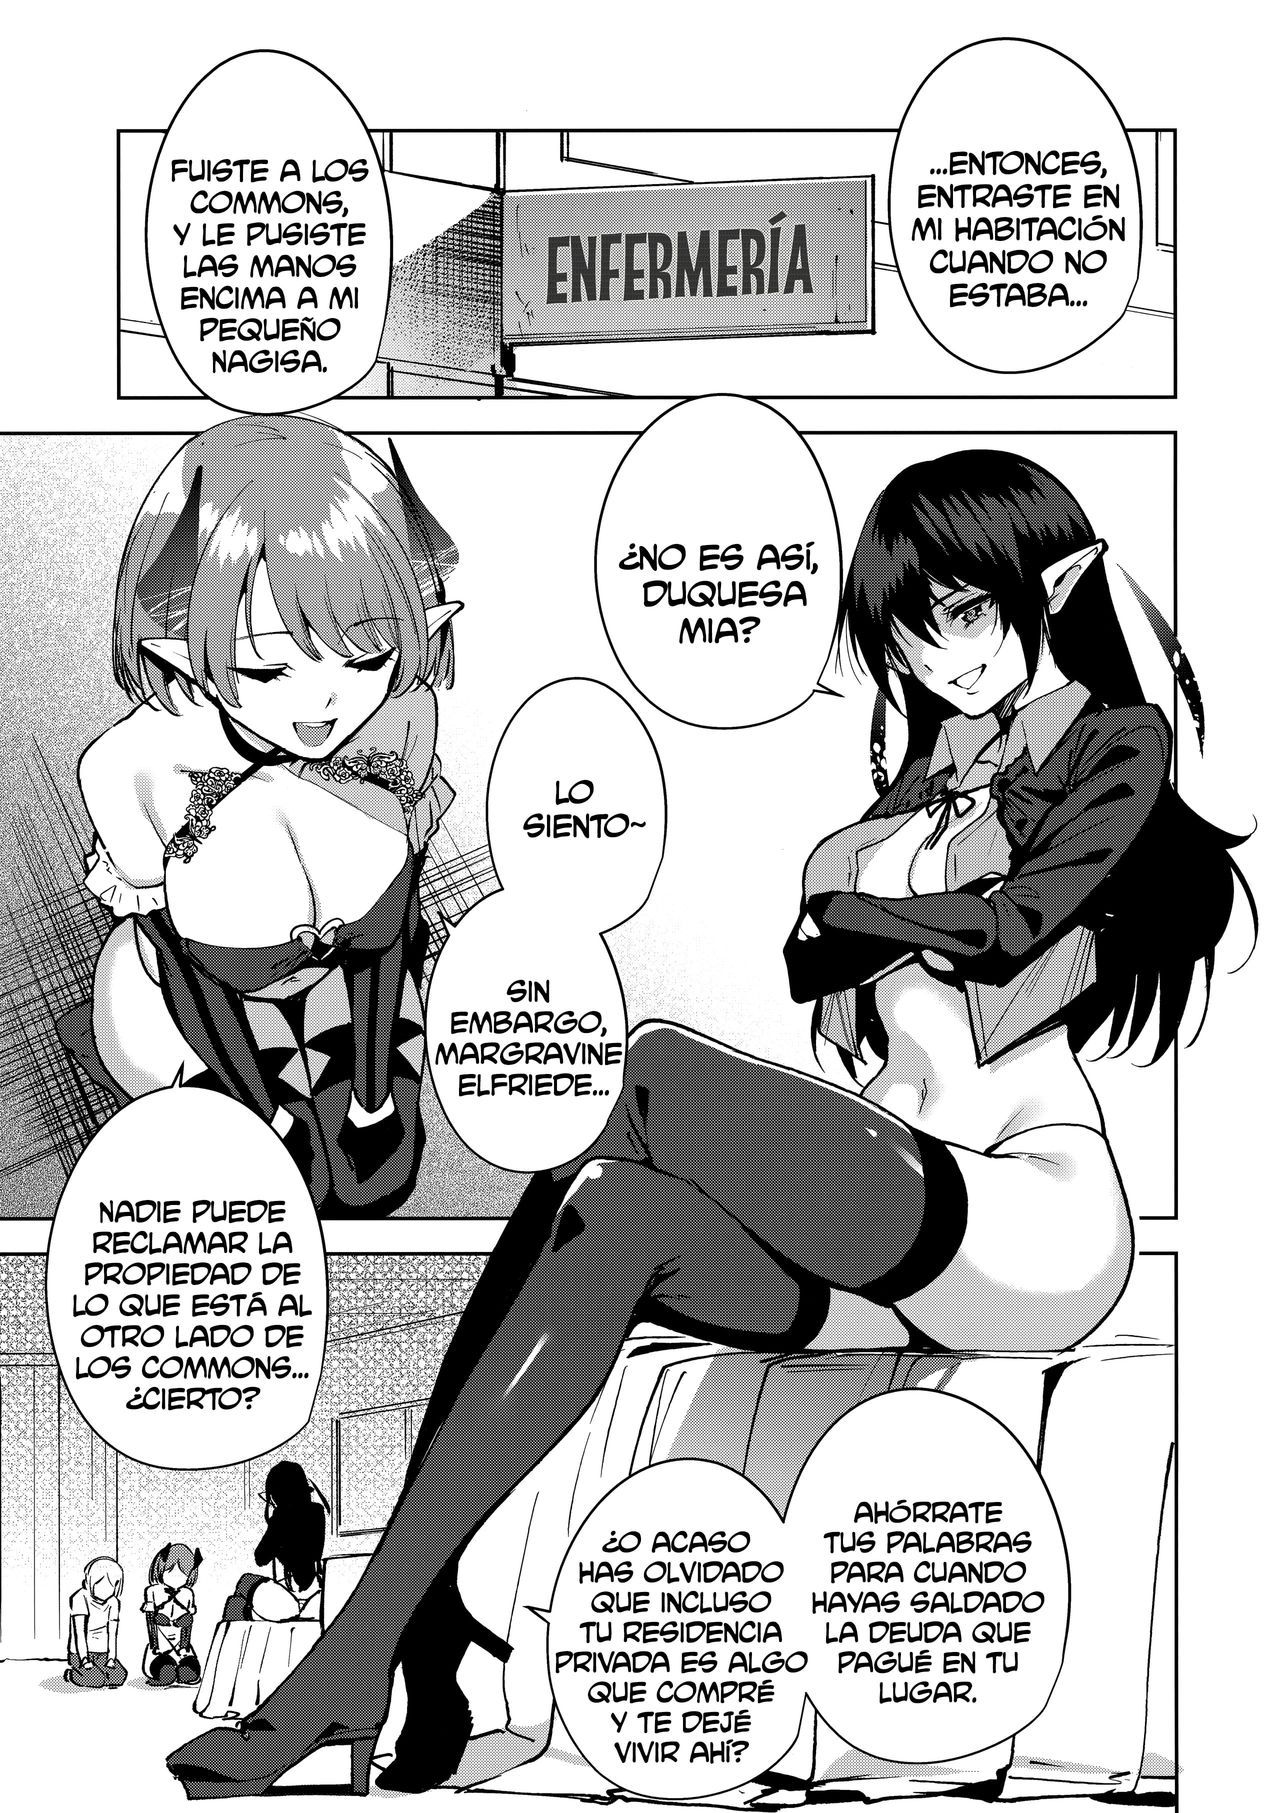 The-Evil-of-Commons-3-Hentai-03.jpg